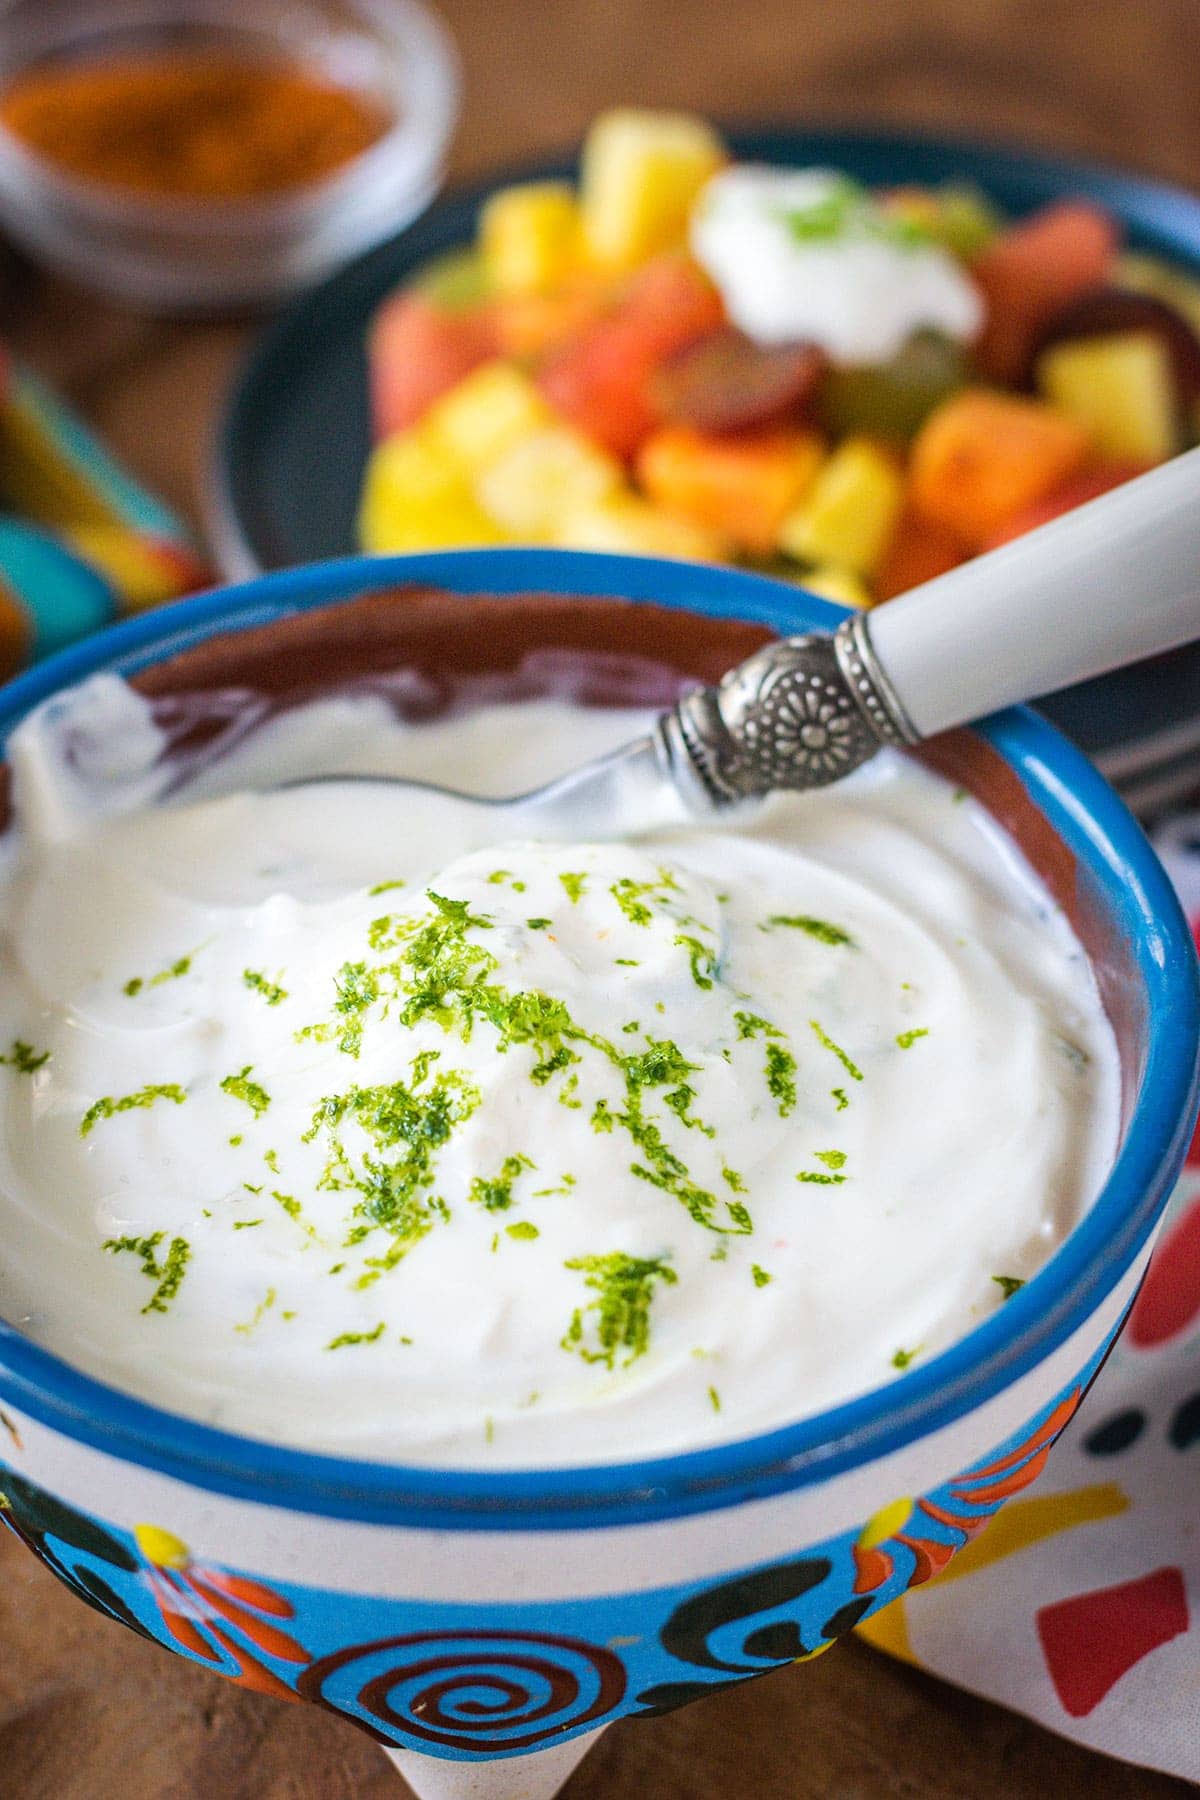 Upclose image of lime yogurt dip with a serving spoon and fruit in the background.